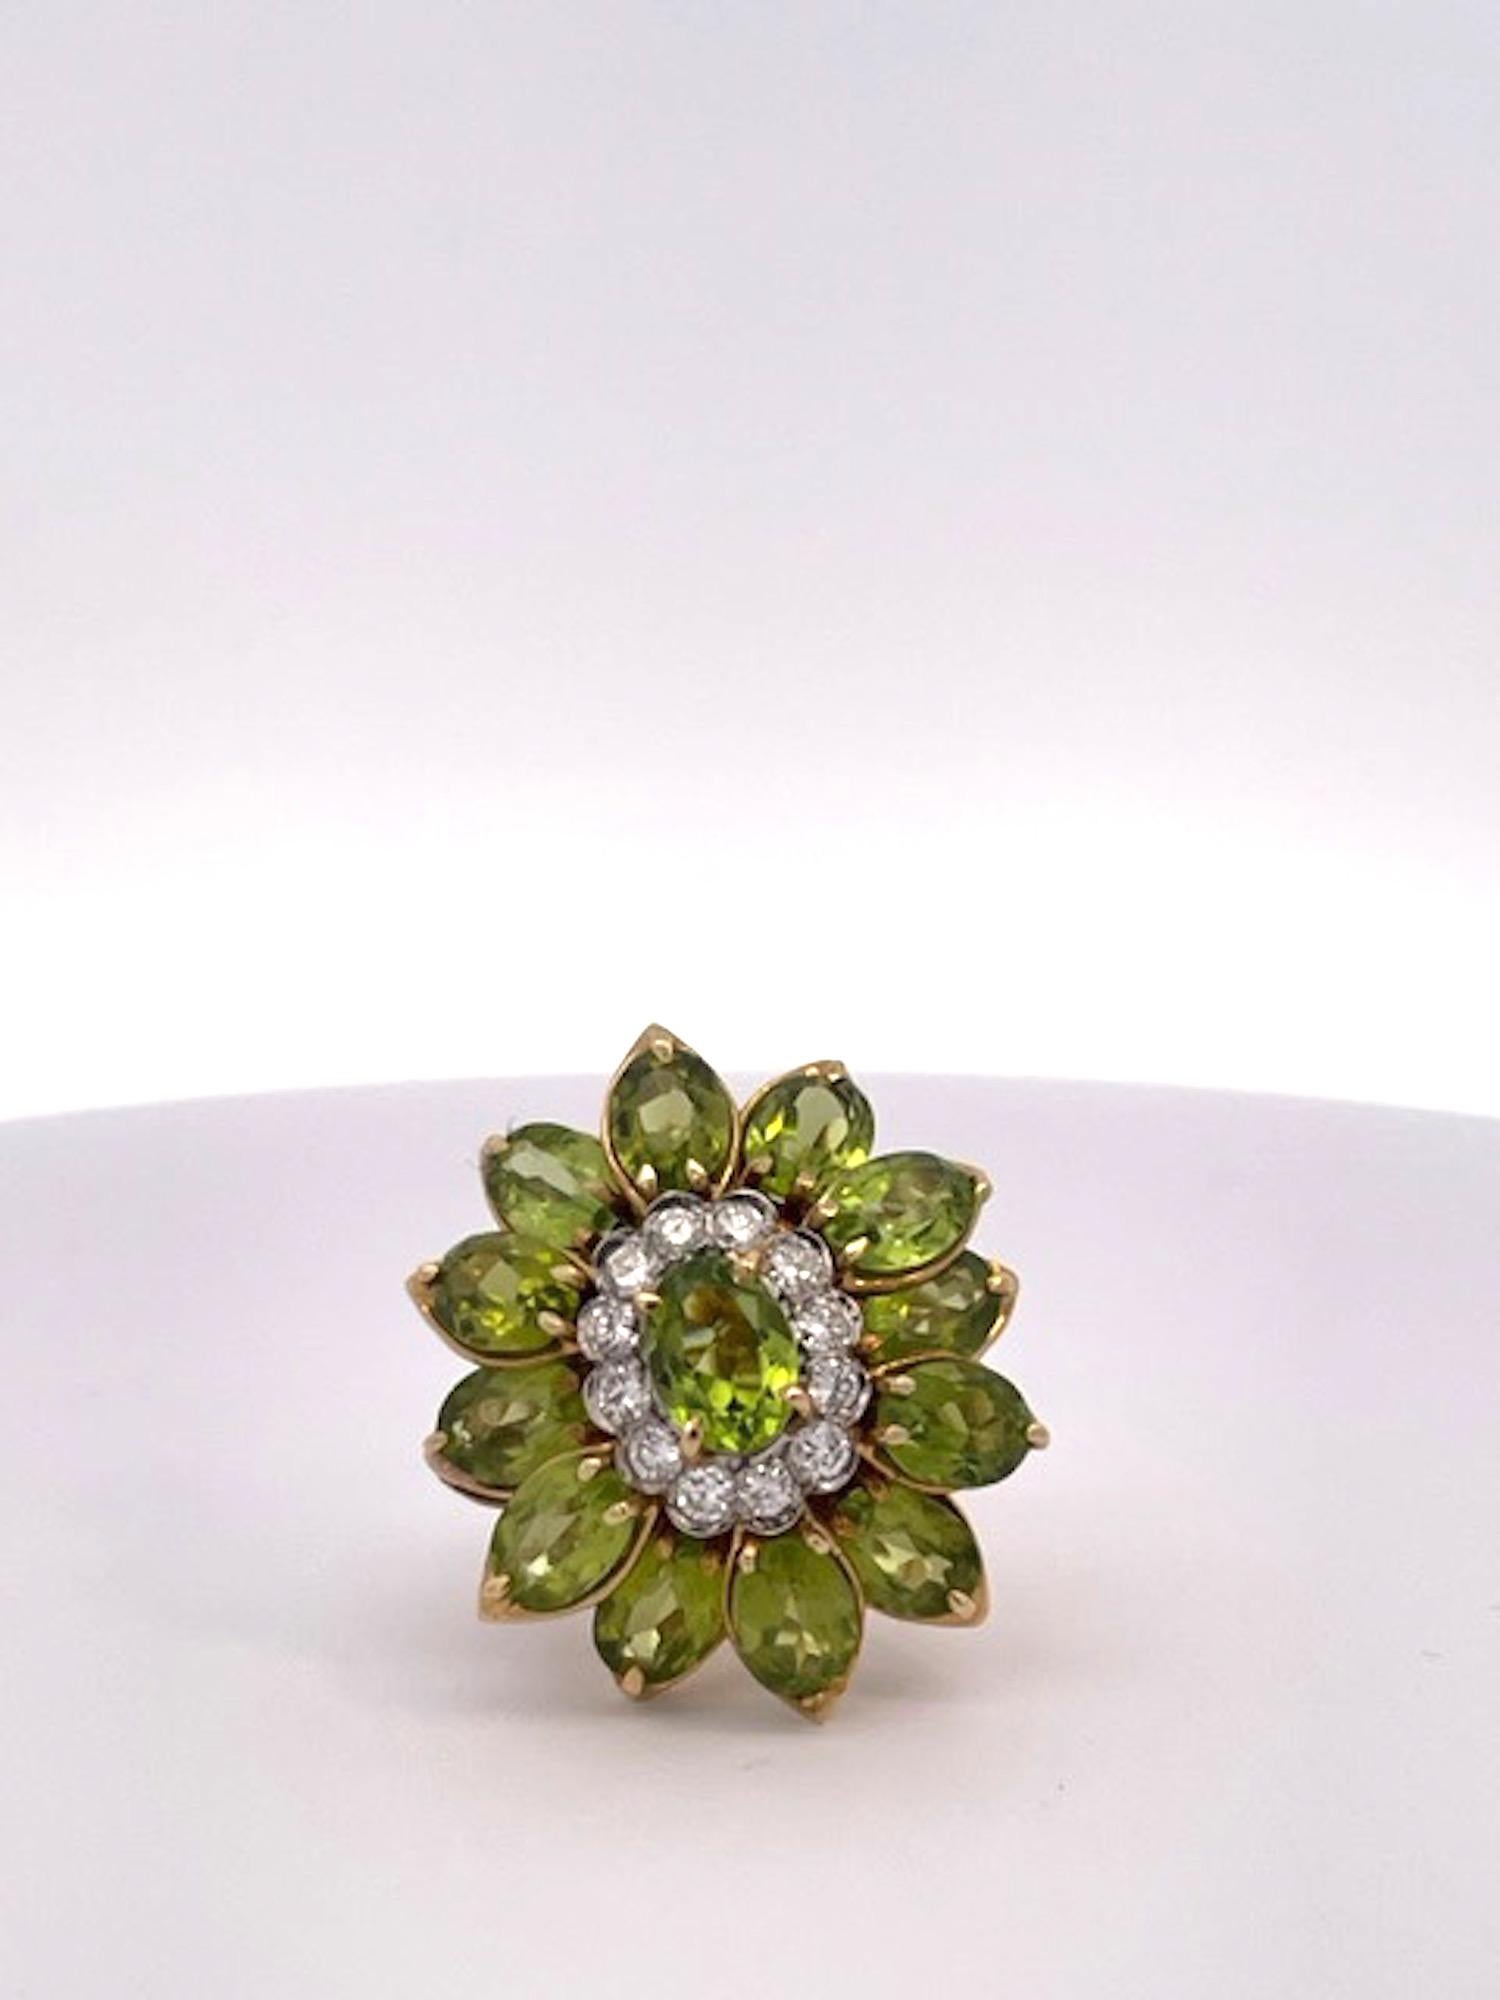 Marquise Cut Huge Peridot Diamond Glamour Ring 14K For Sale